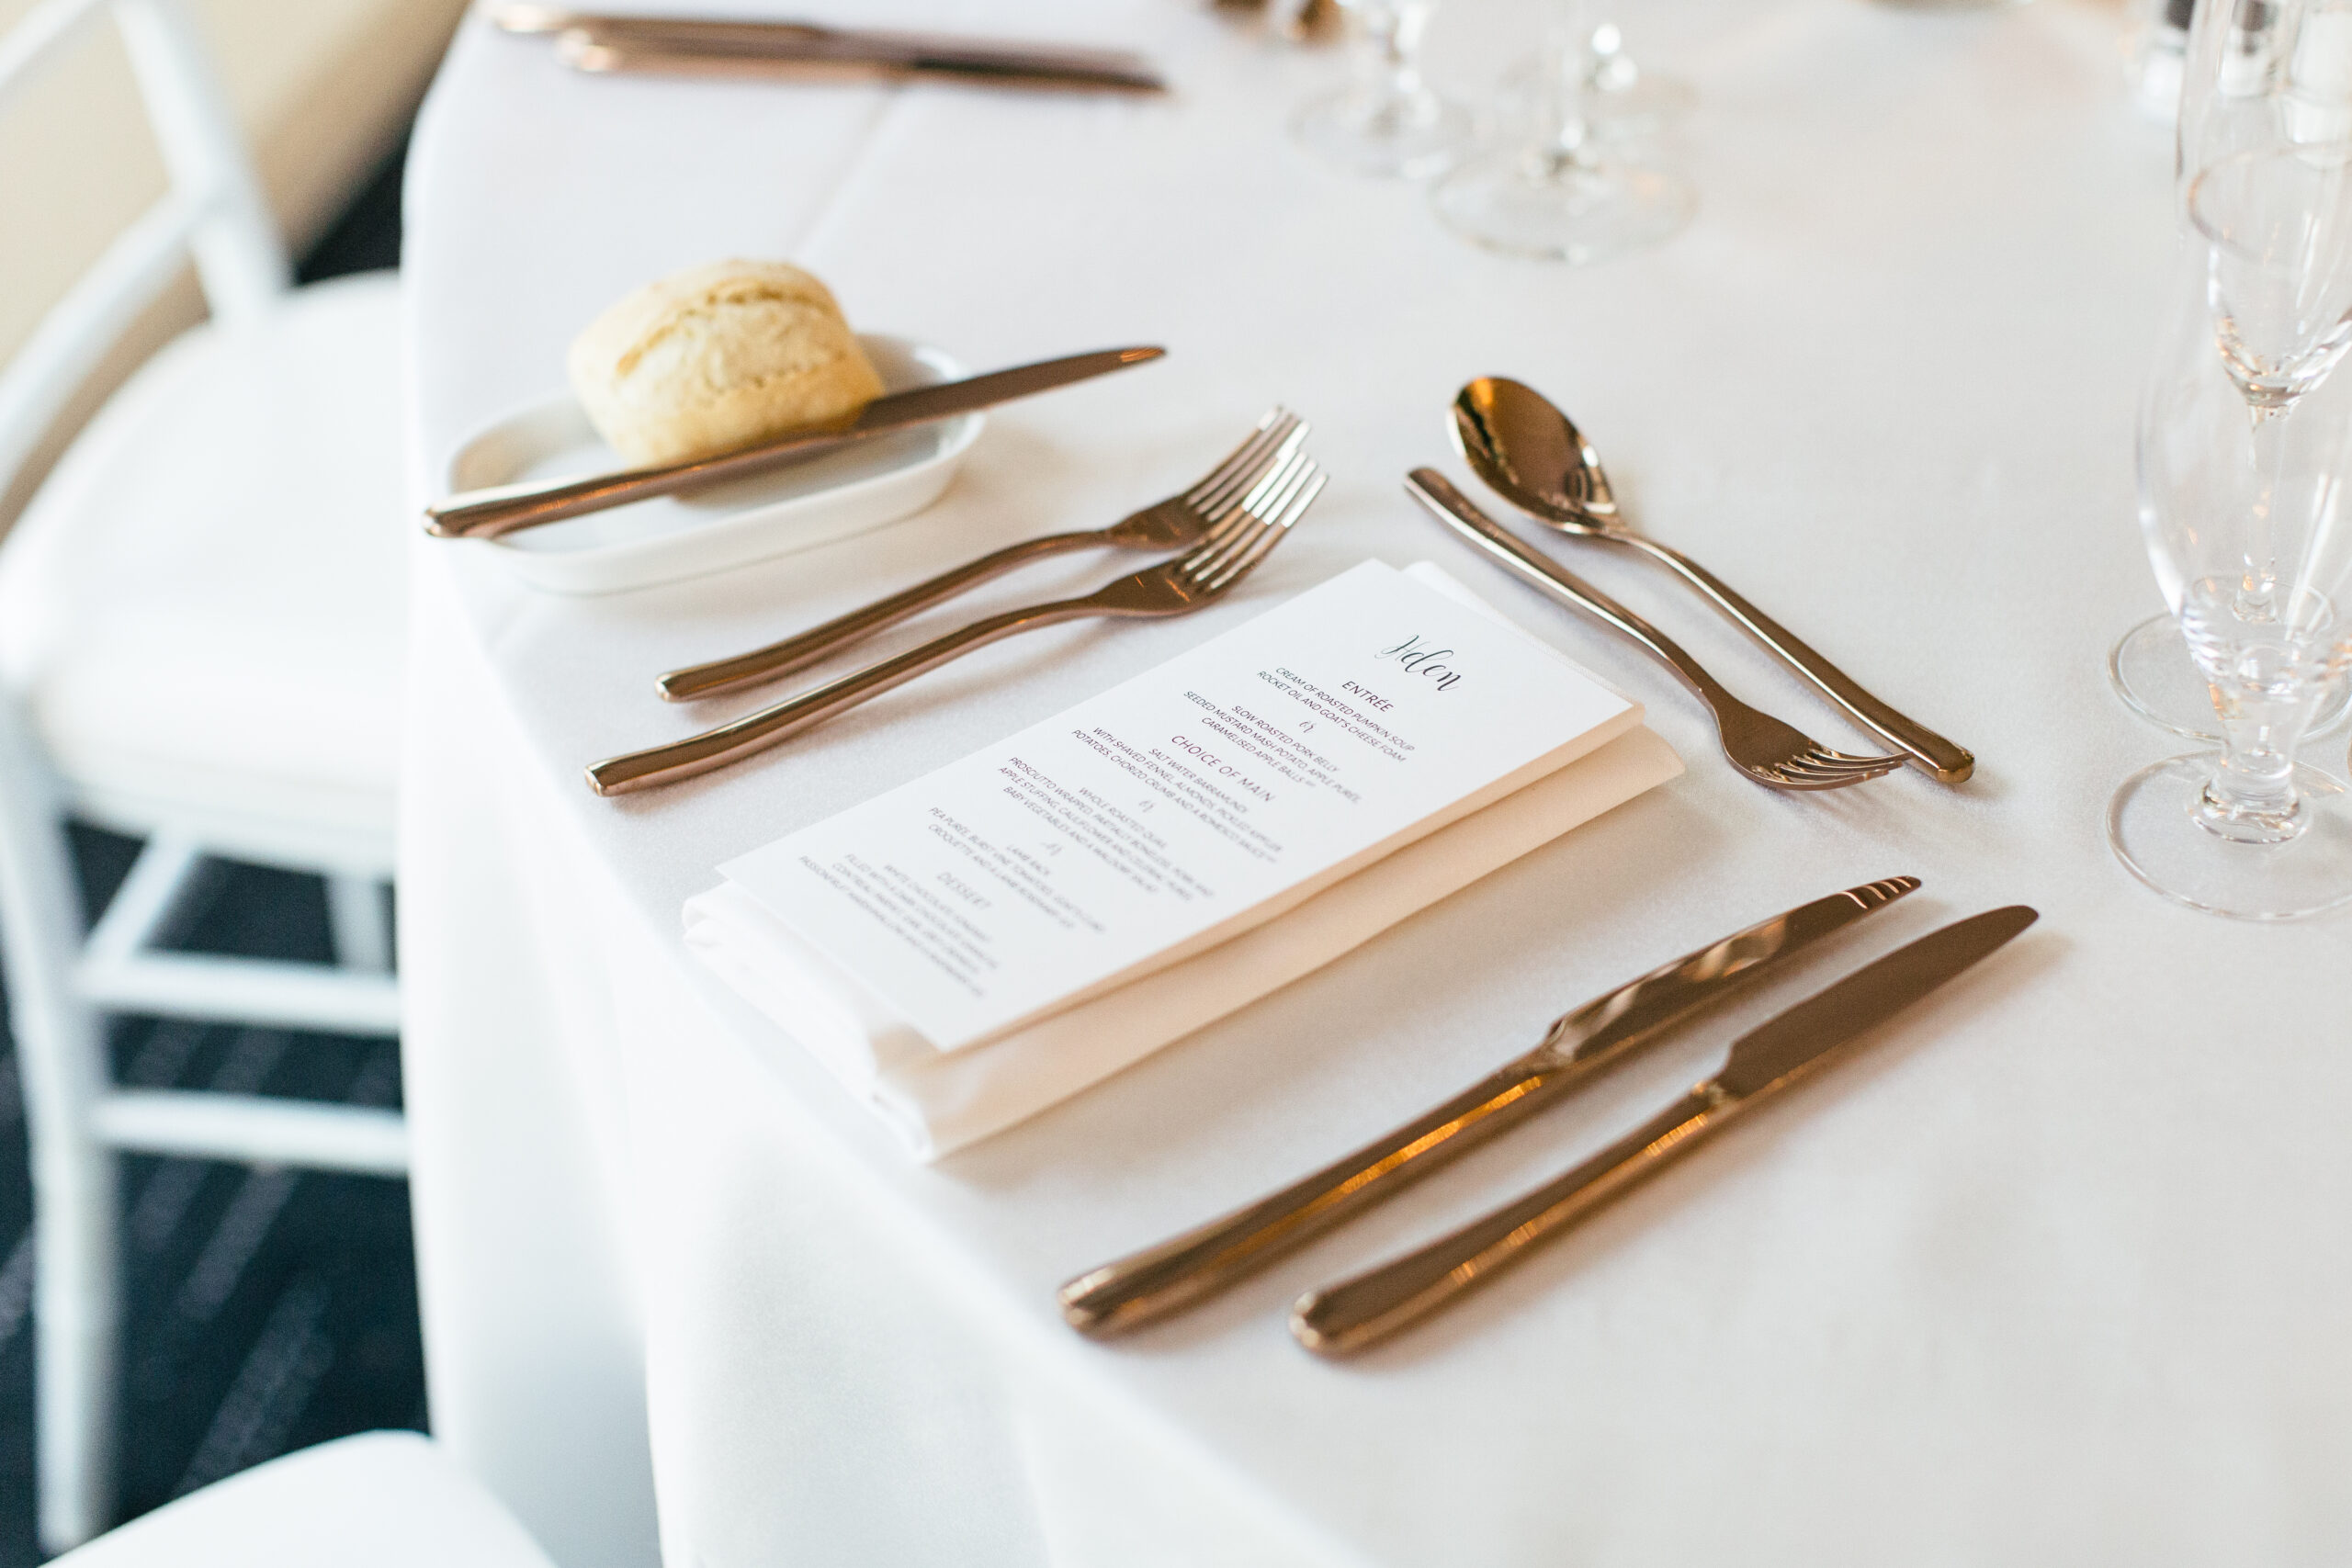 rose-gold-cutlery-albany-event-hire